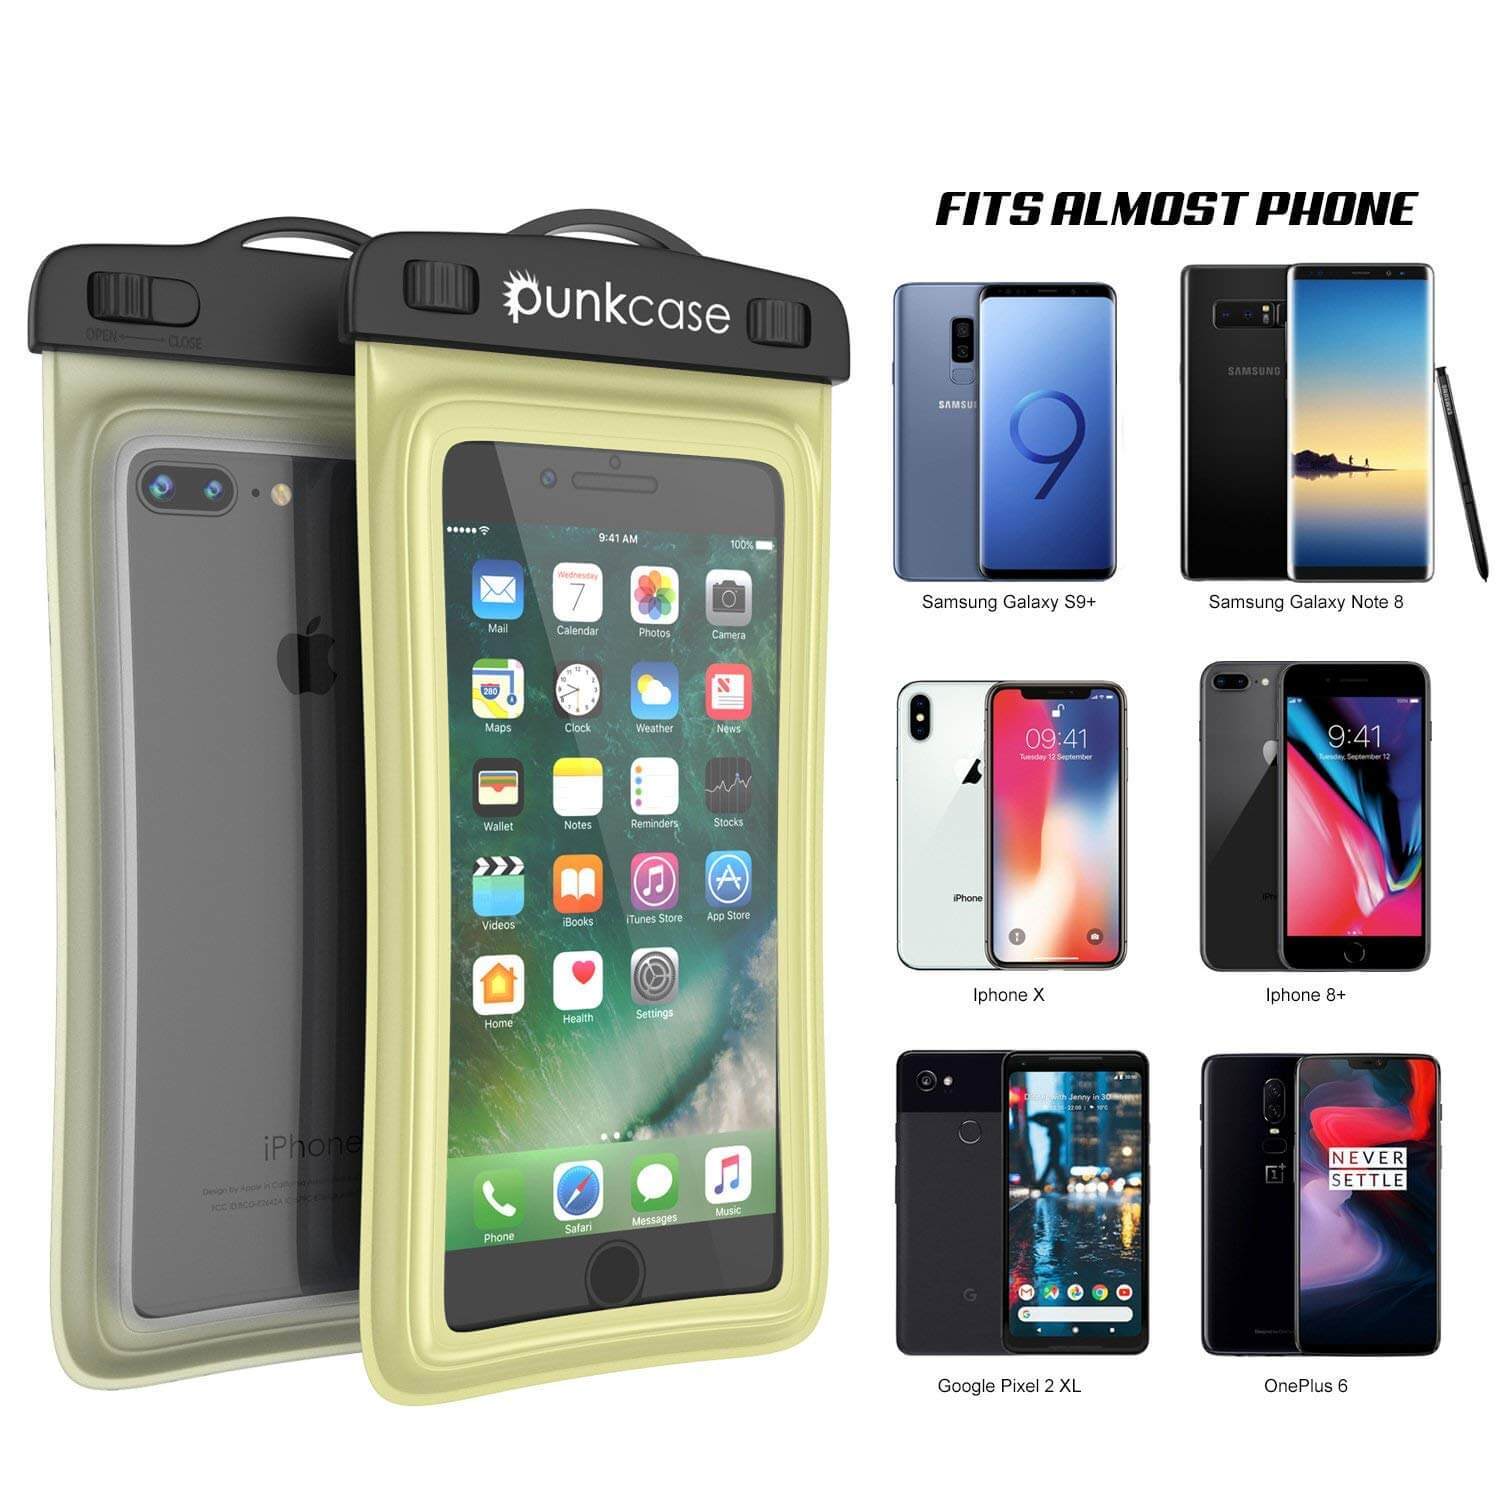 Waterproof Phone Pouch, PunkBag Universal Floating Dry Case Bag for most Cell Phones [Light Green]